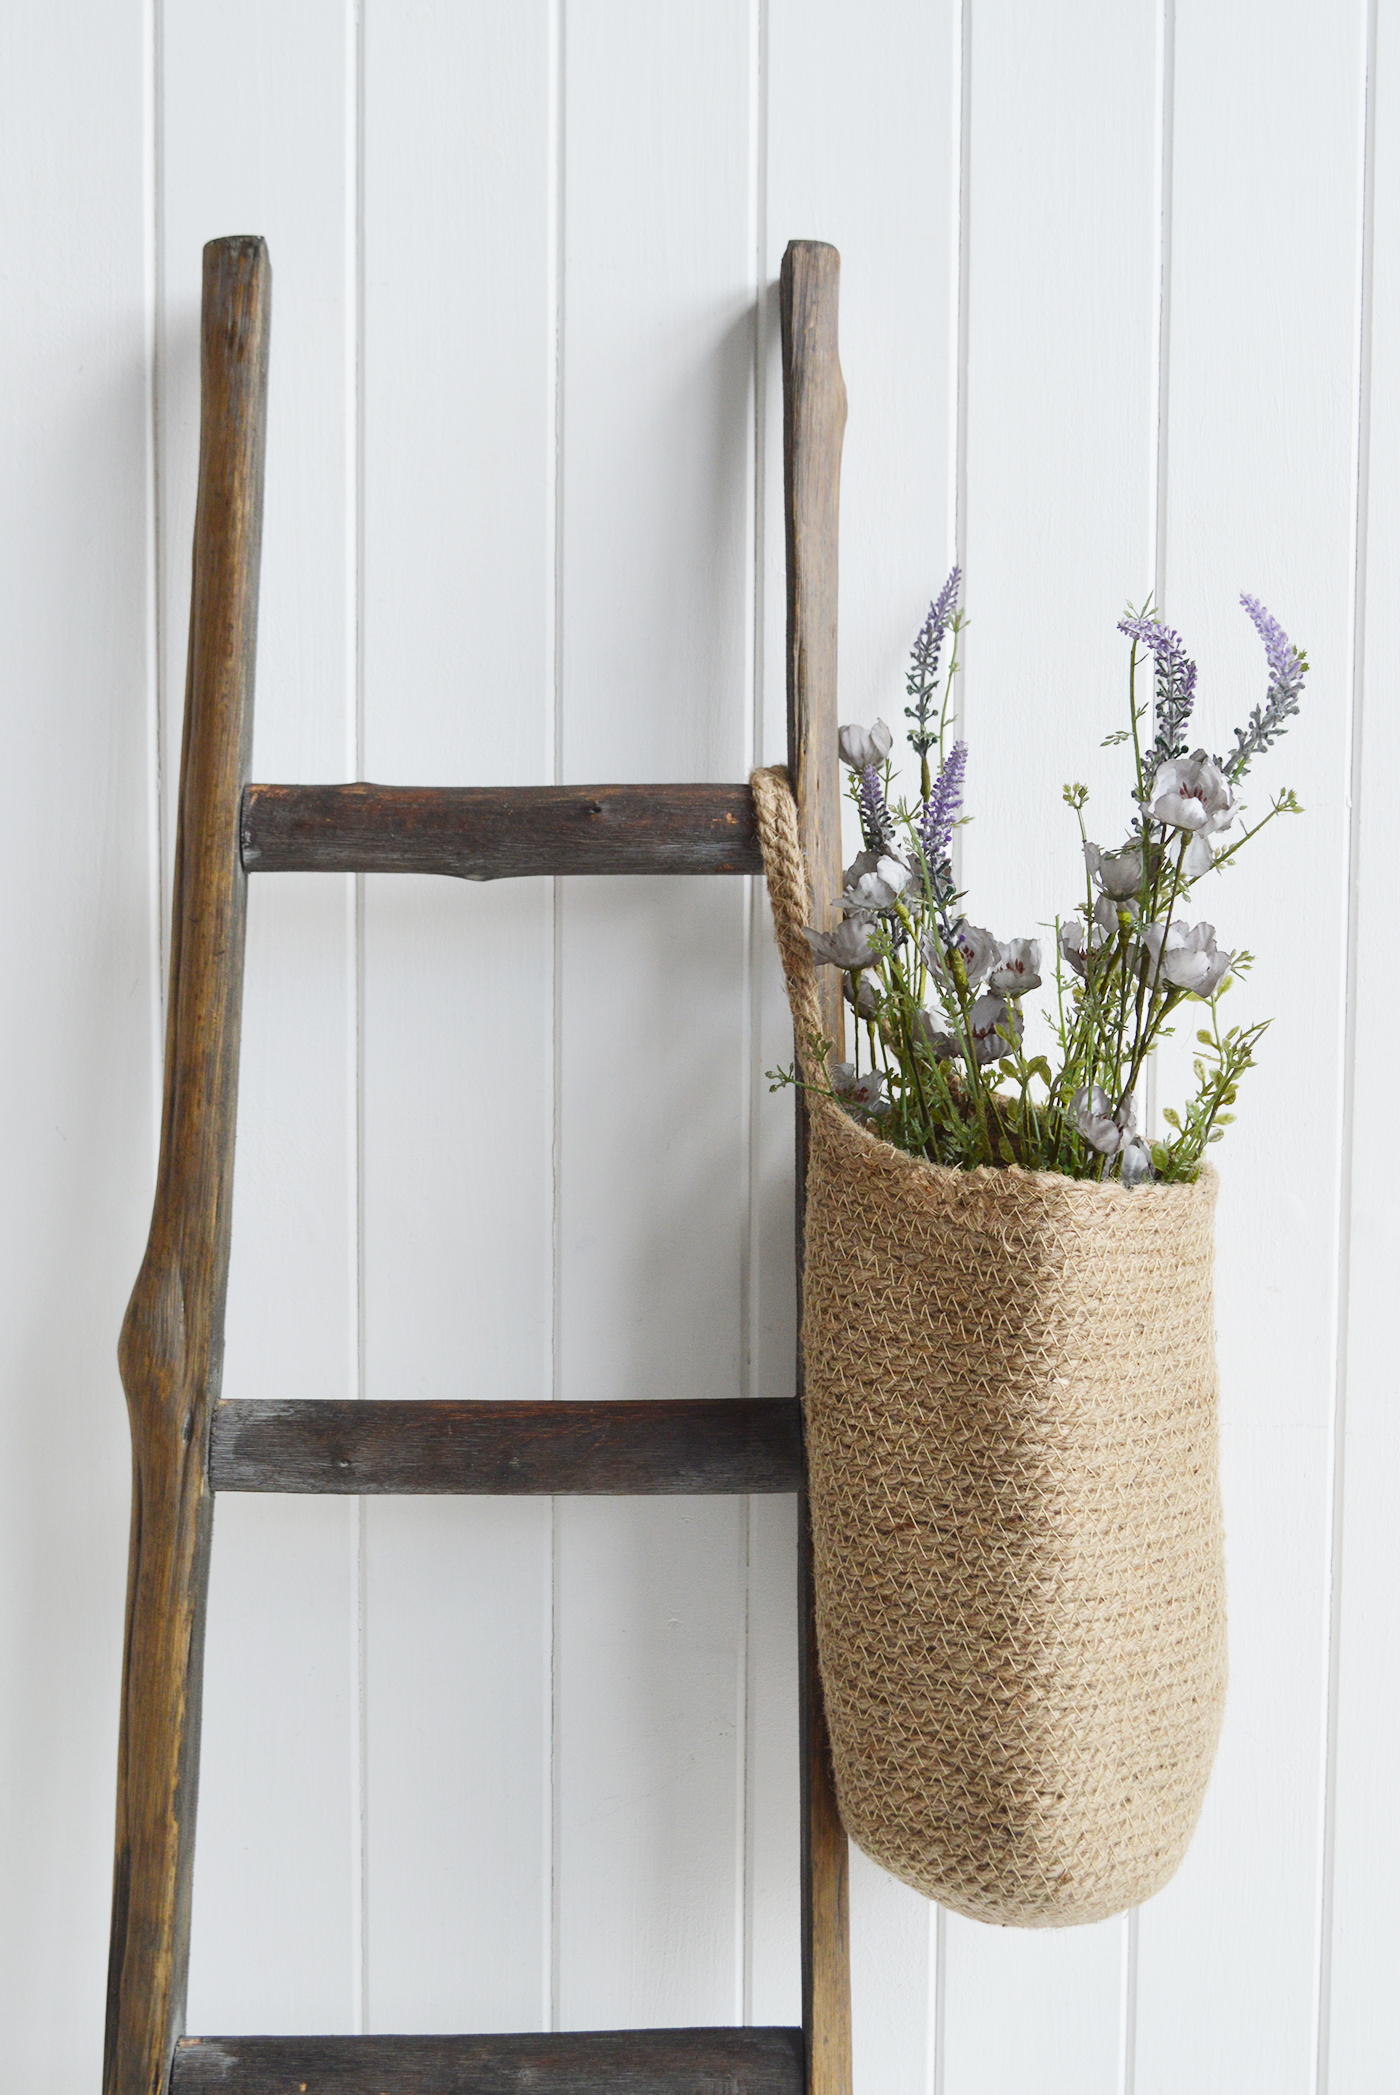 Campton basket filled with wild blue rose for pretty New England interiors